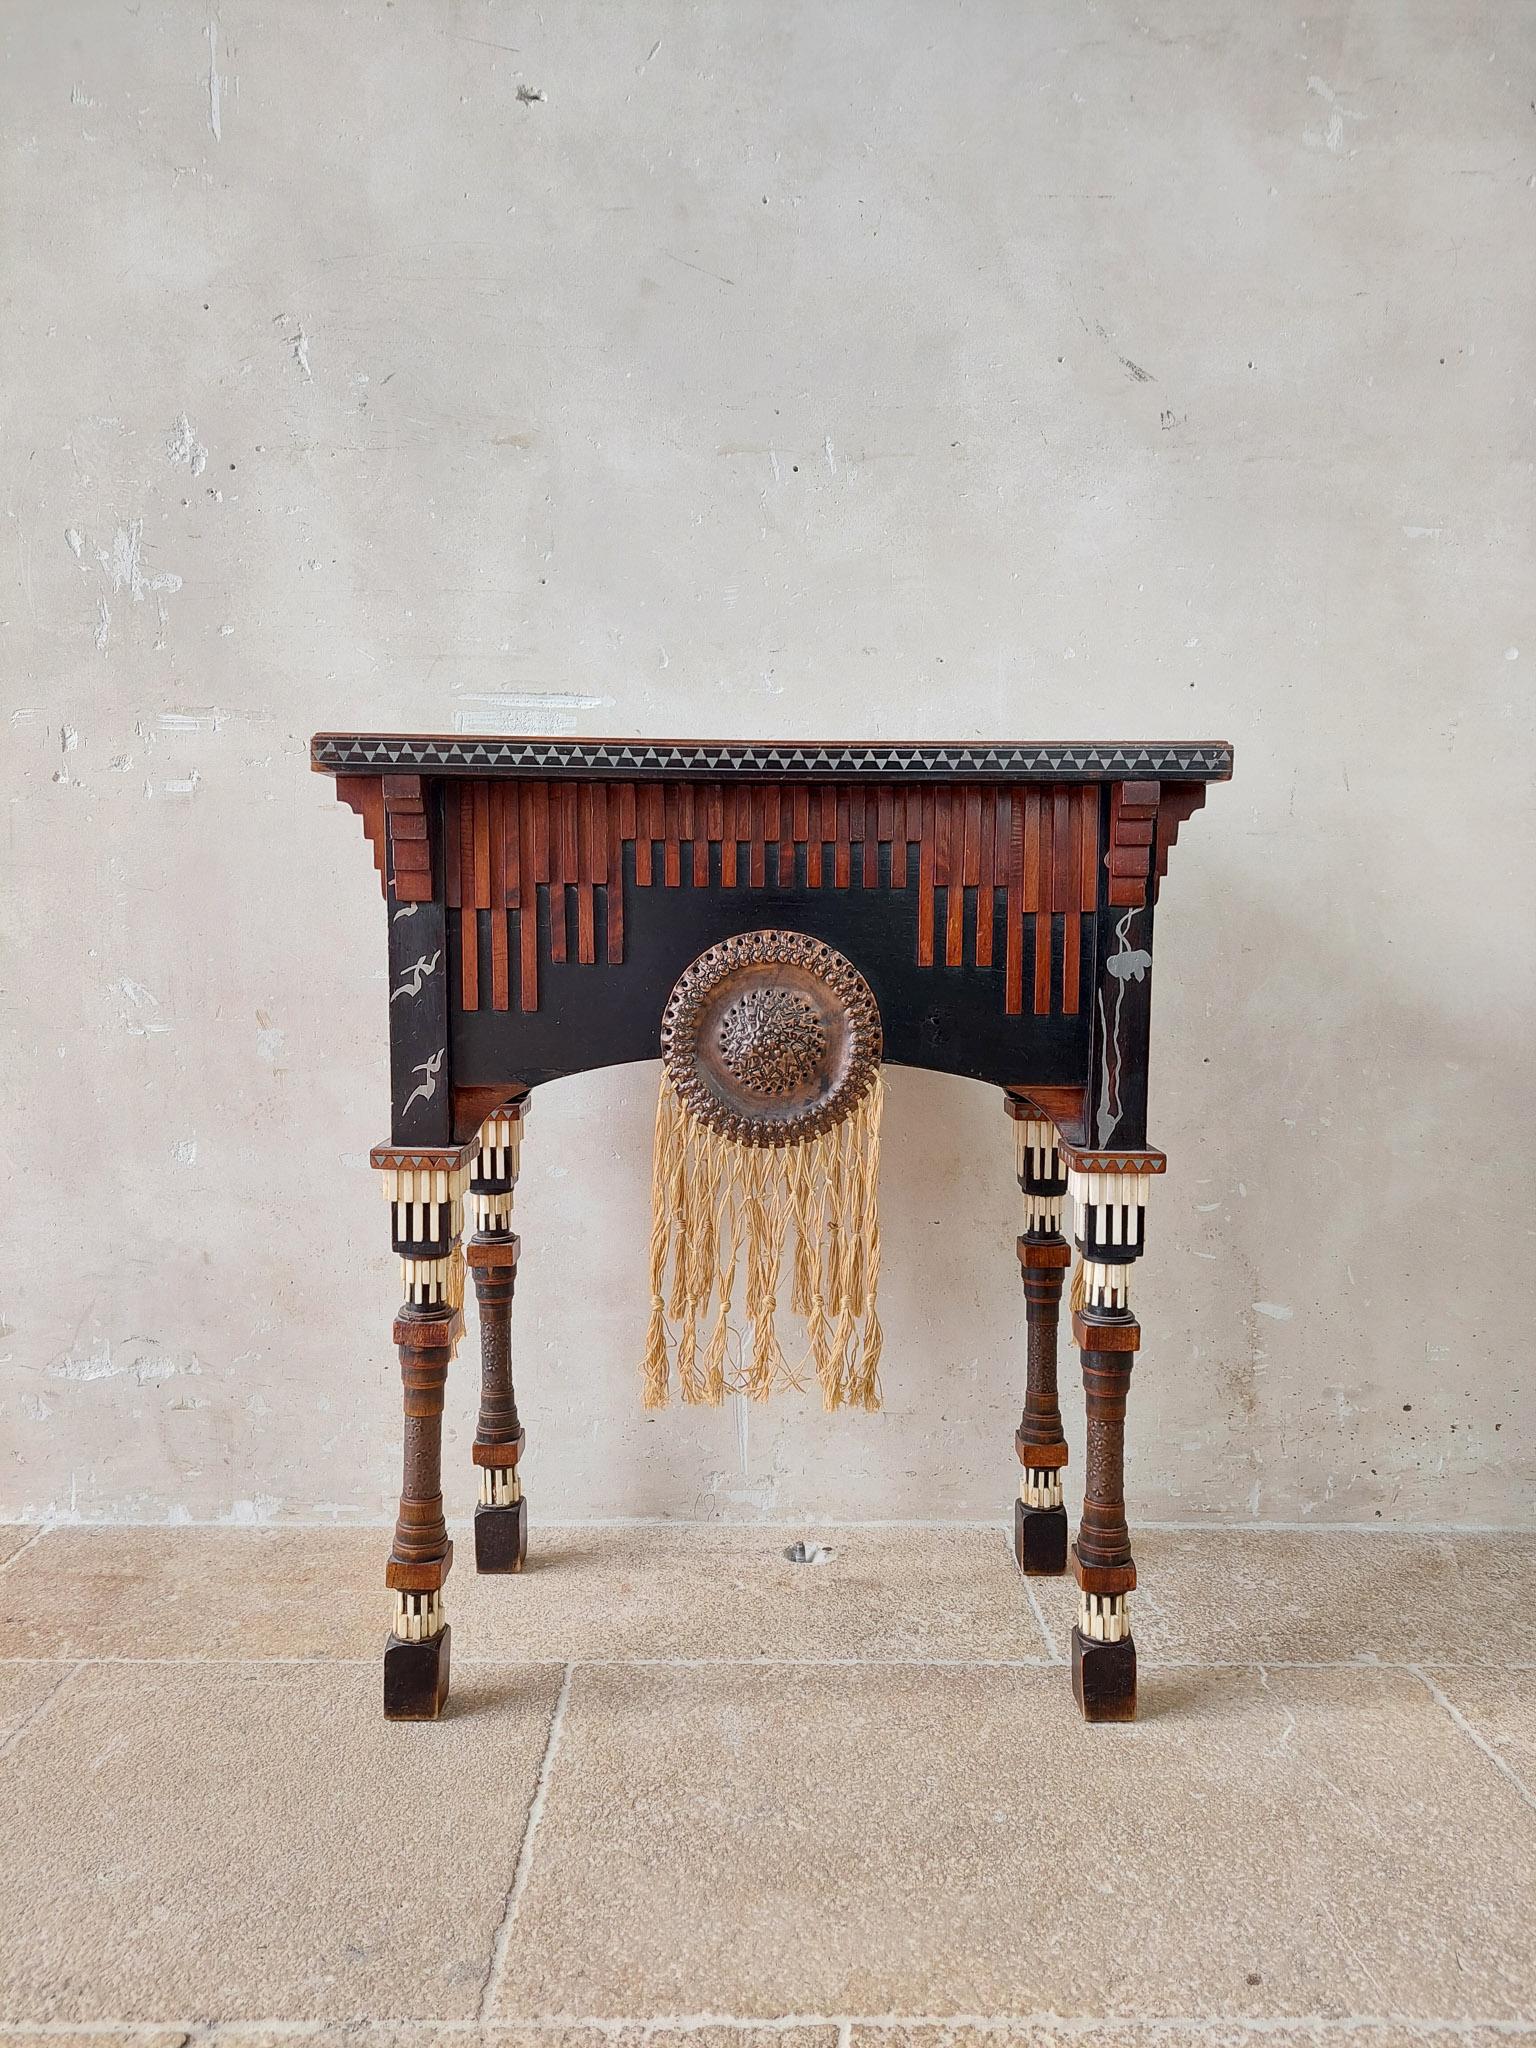 This unique tea table / sewing table is from the well-known designer Carlo Bugatti.

Carlo Bugatti was a prominent Italian designer. Best known for his associations and contributions to the Art Nouveau movement. Born in Italy, Milan, 1856. He